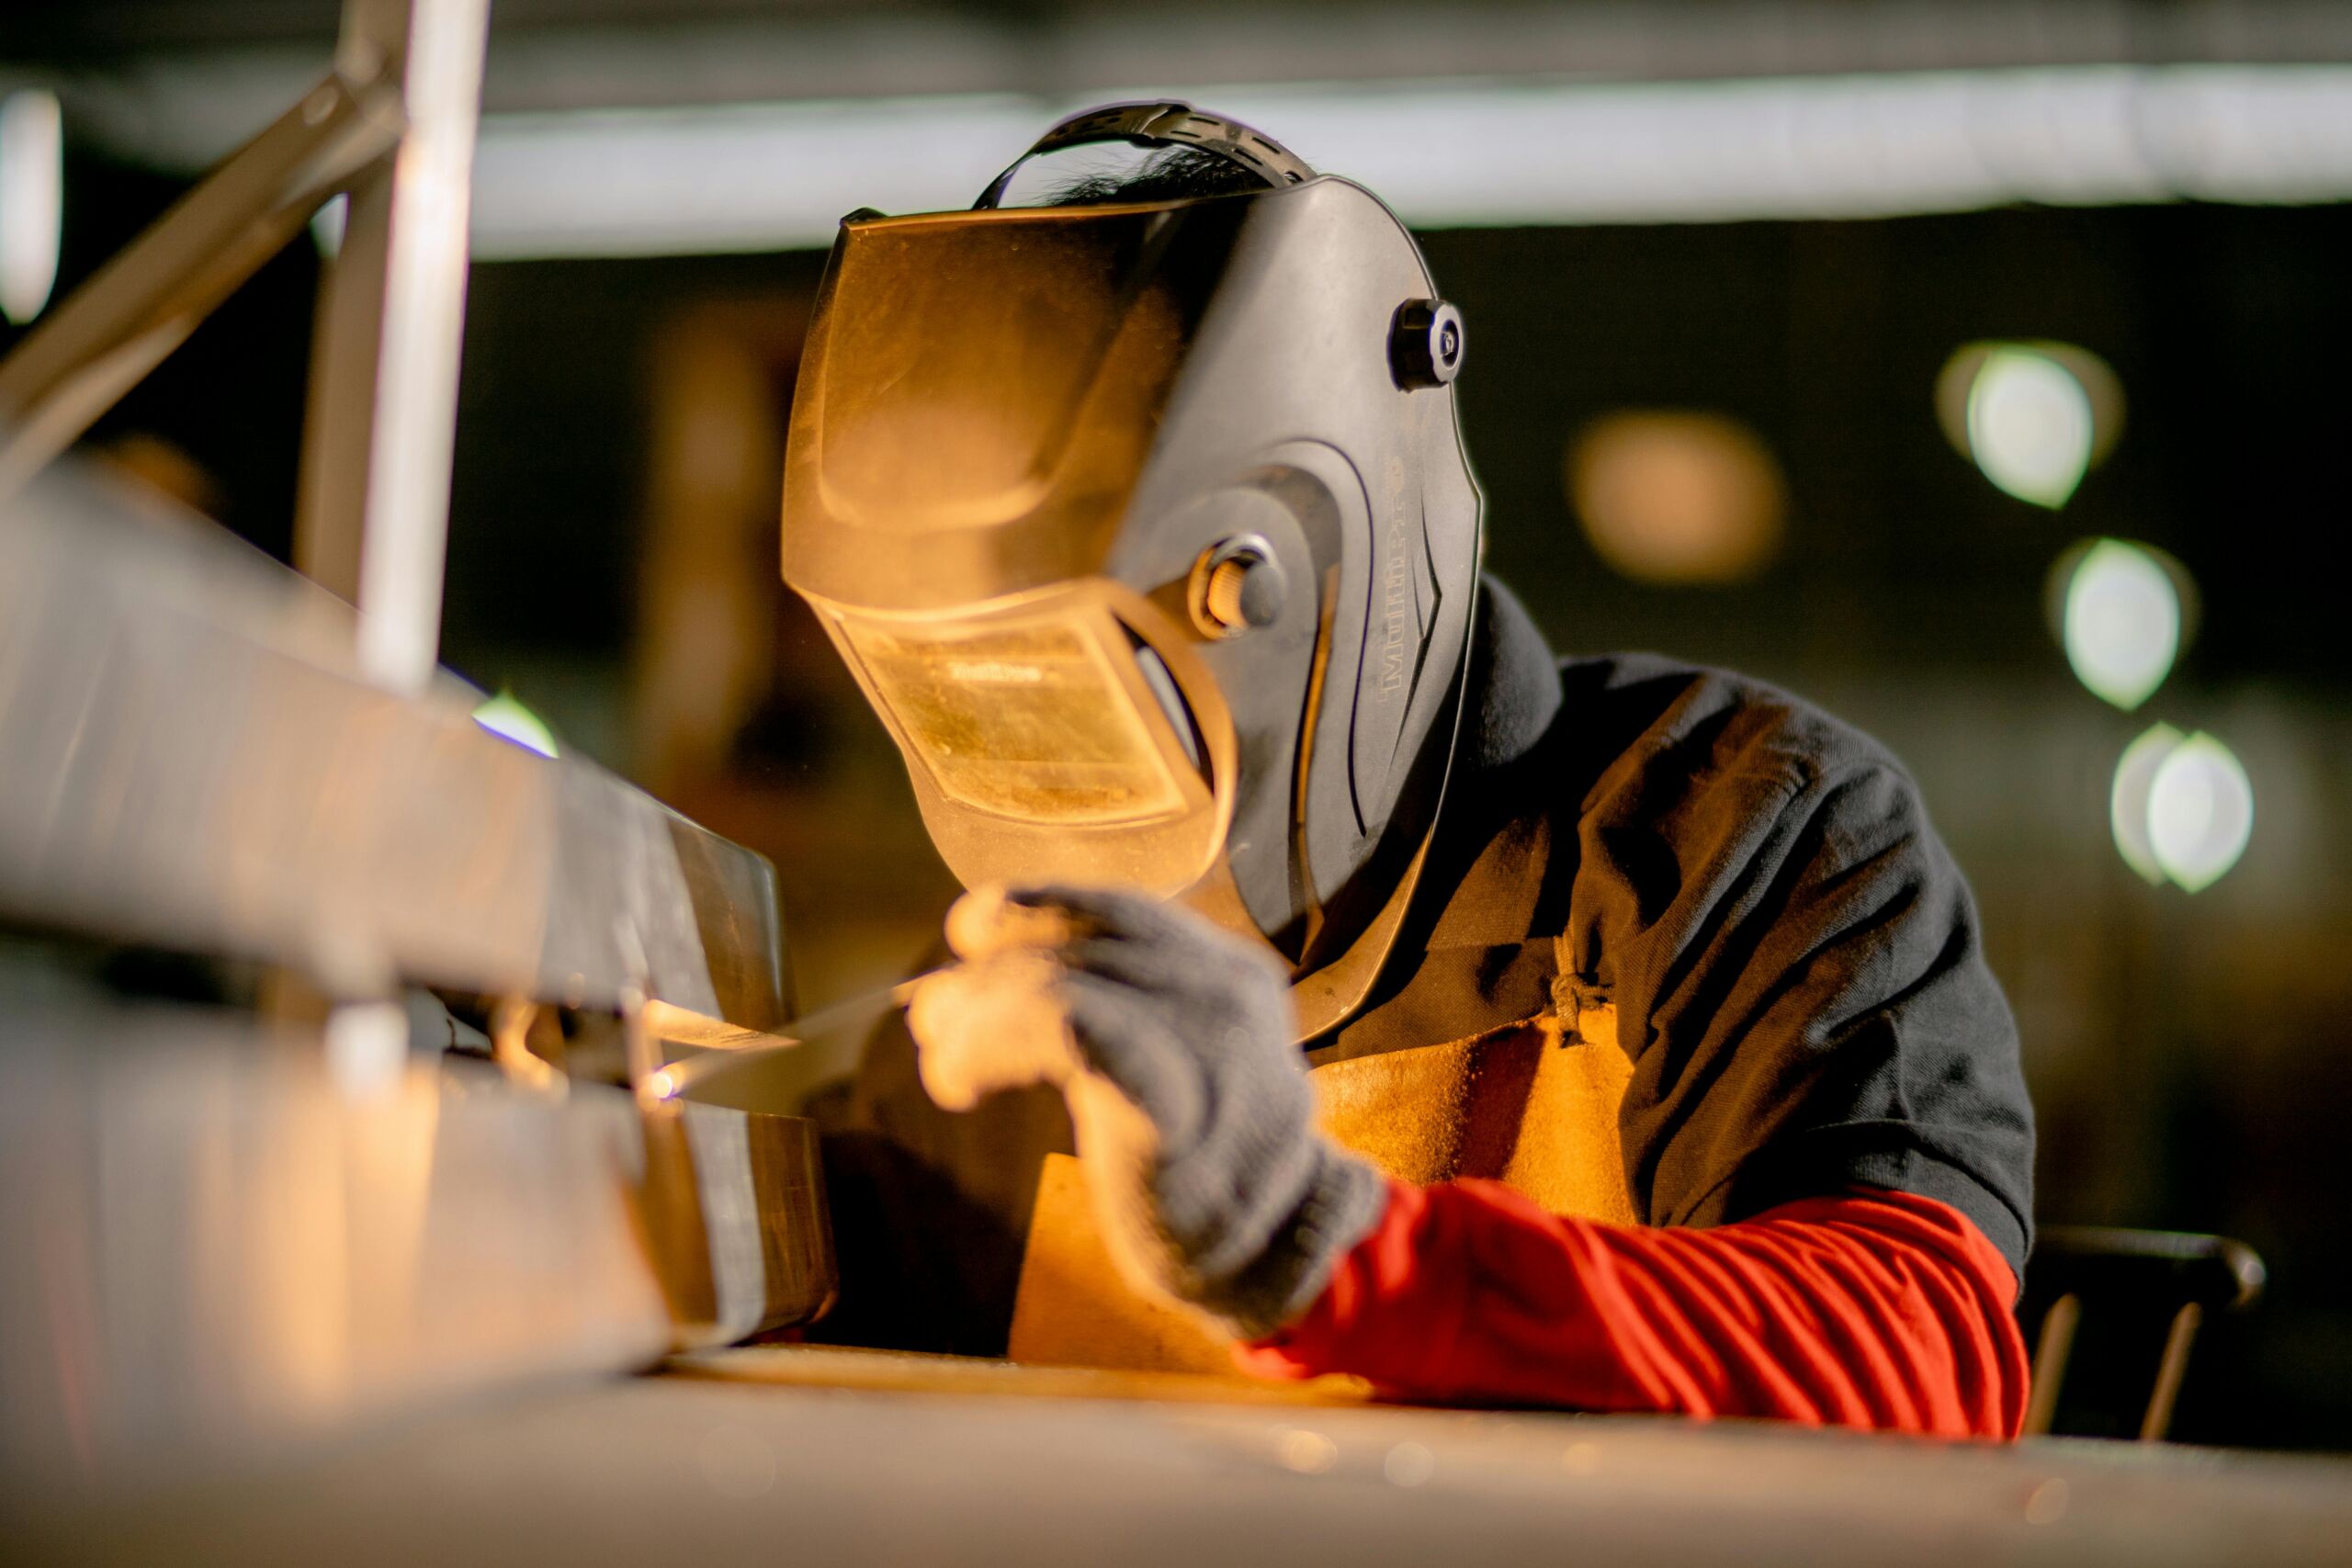 A skilled Admalite welder in action, welding a component of a 3-ton gantry crane in a manufacturing facility in the USA. The image captures the precision and expertise involved in the assembly process, emphasizing the commitment to safety, functionality, and support of American manufacturing standards.